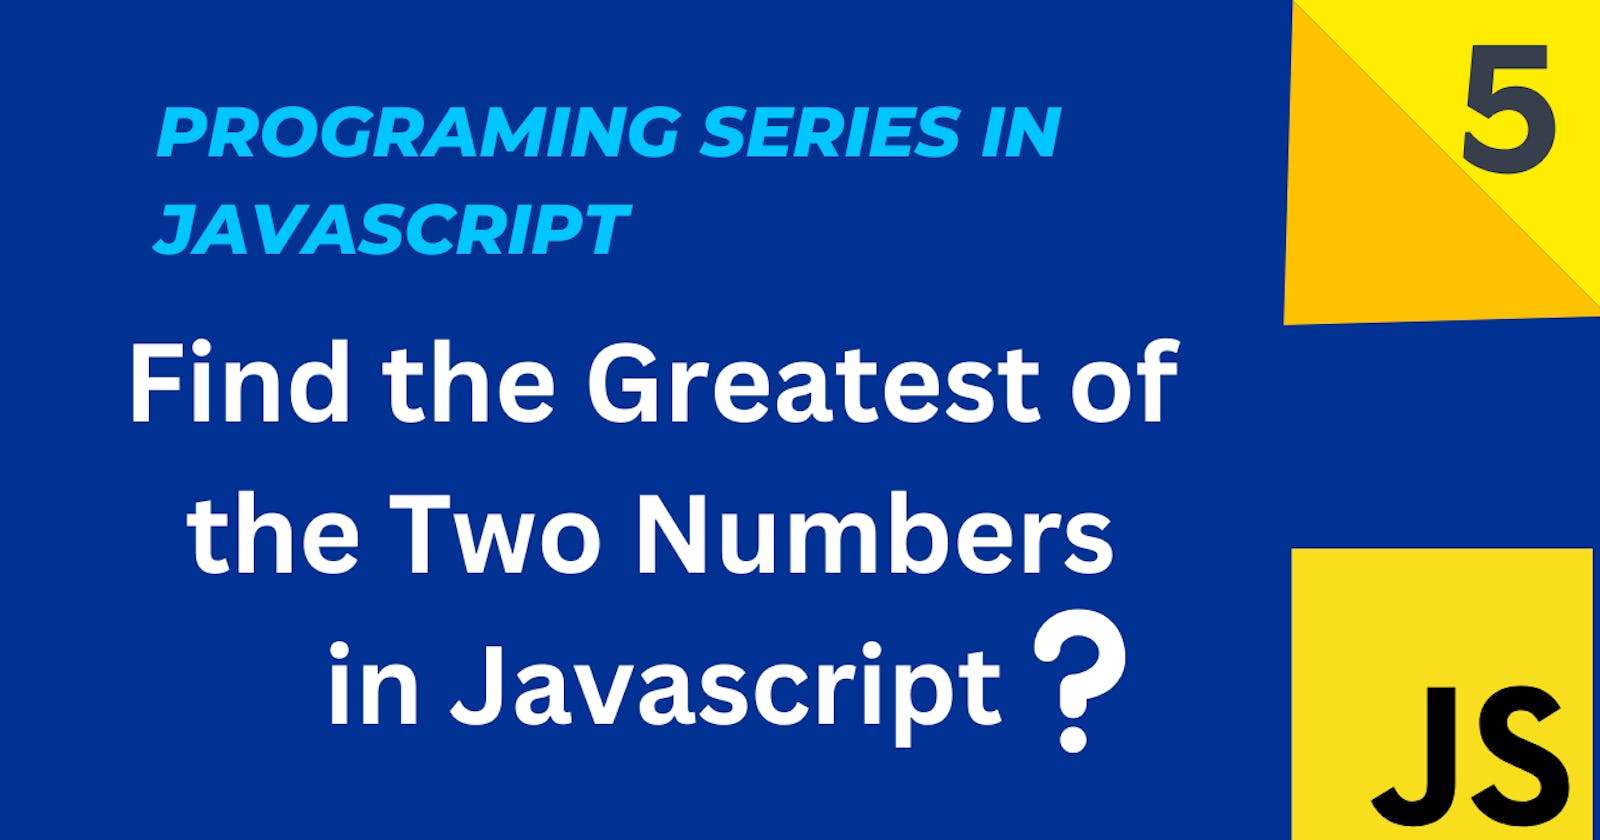 Find the Greatest of the Two Numbers in Javascript